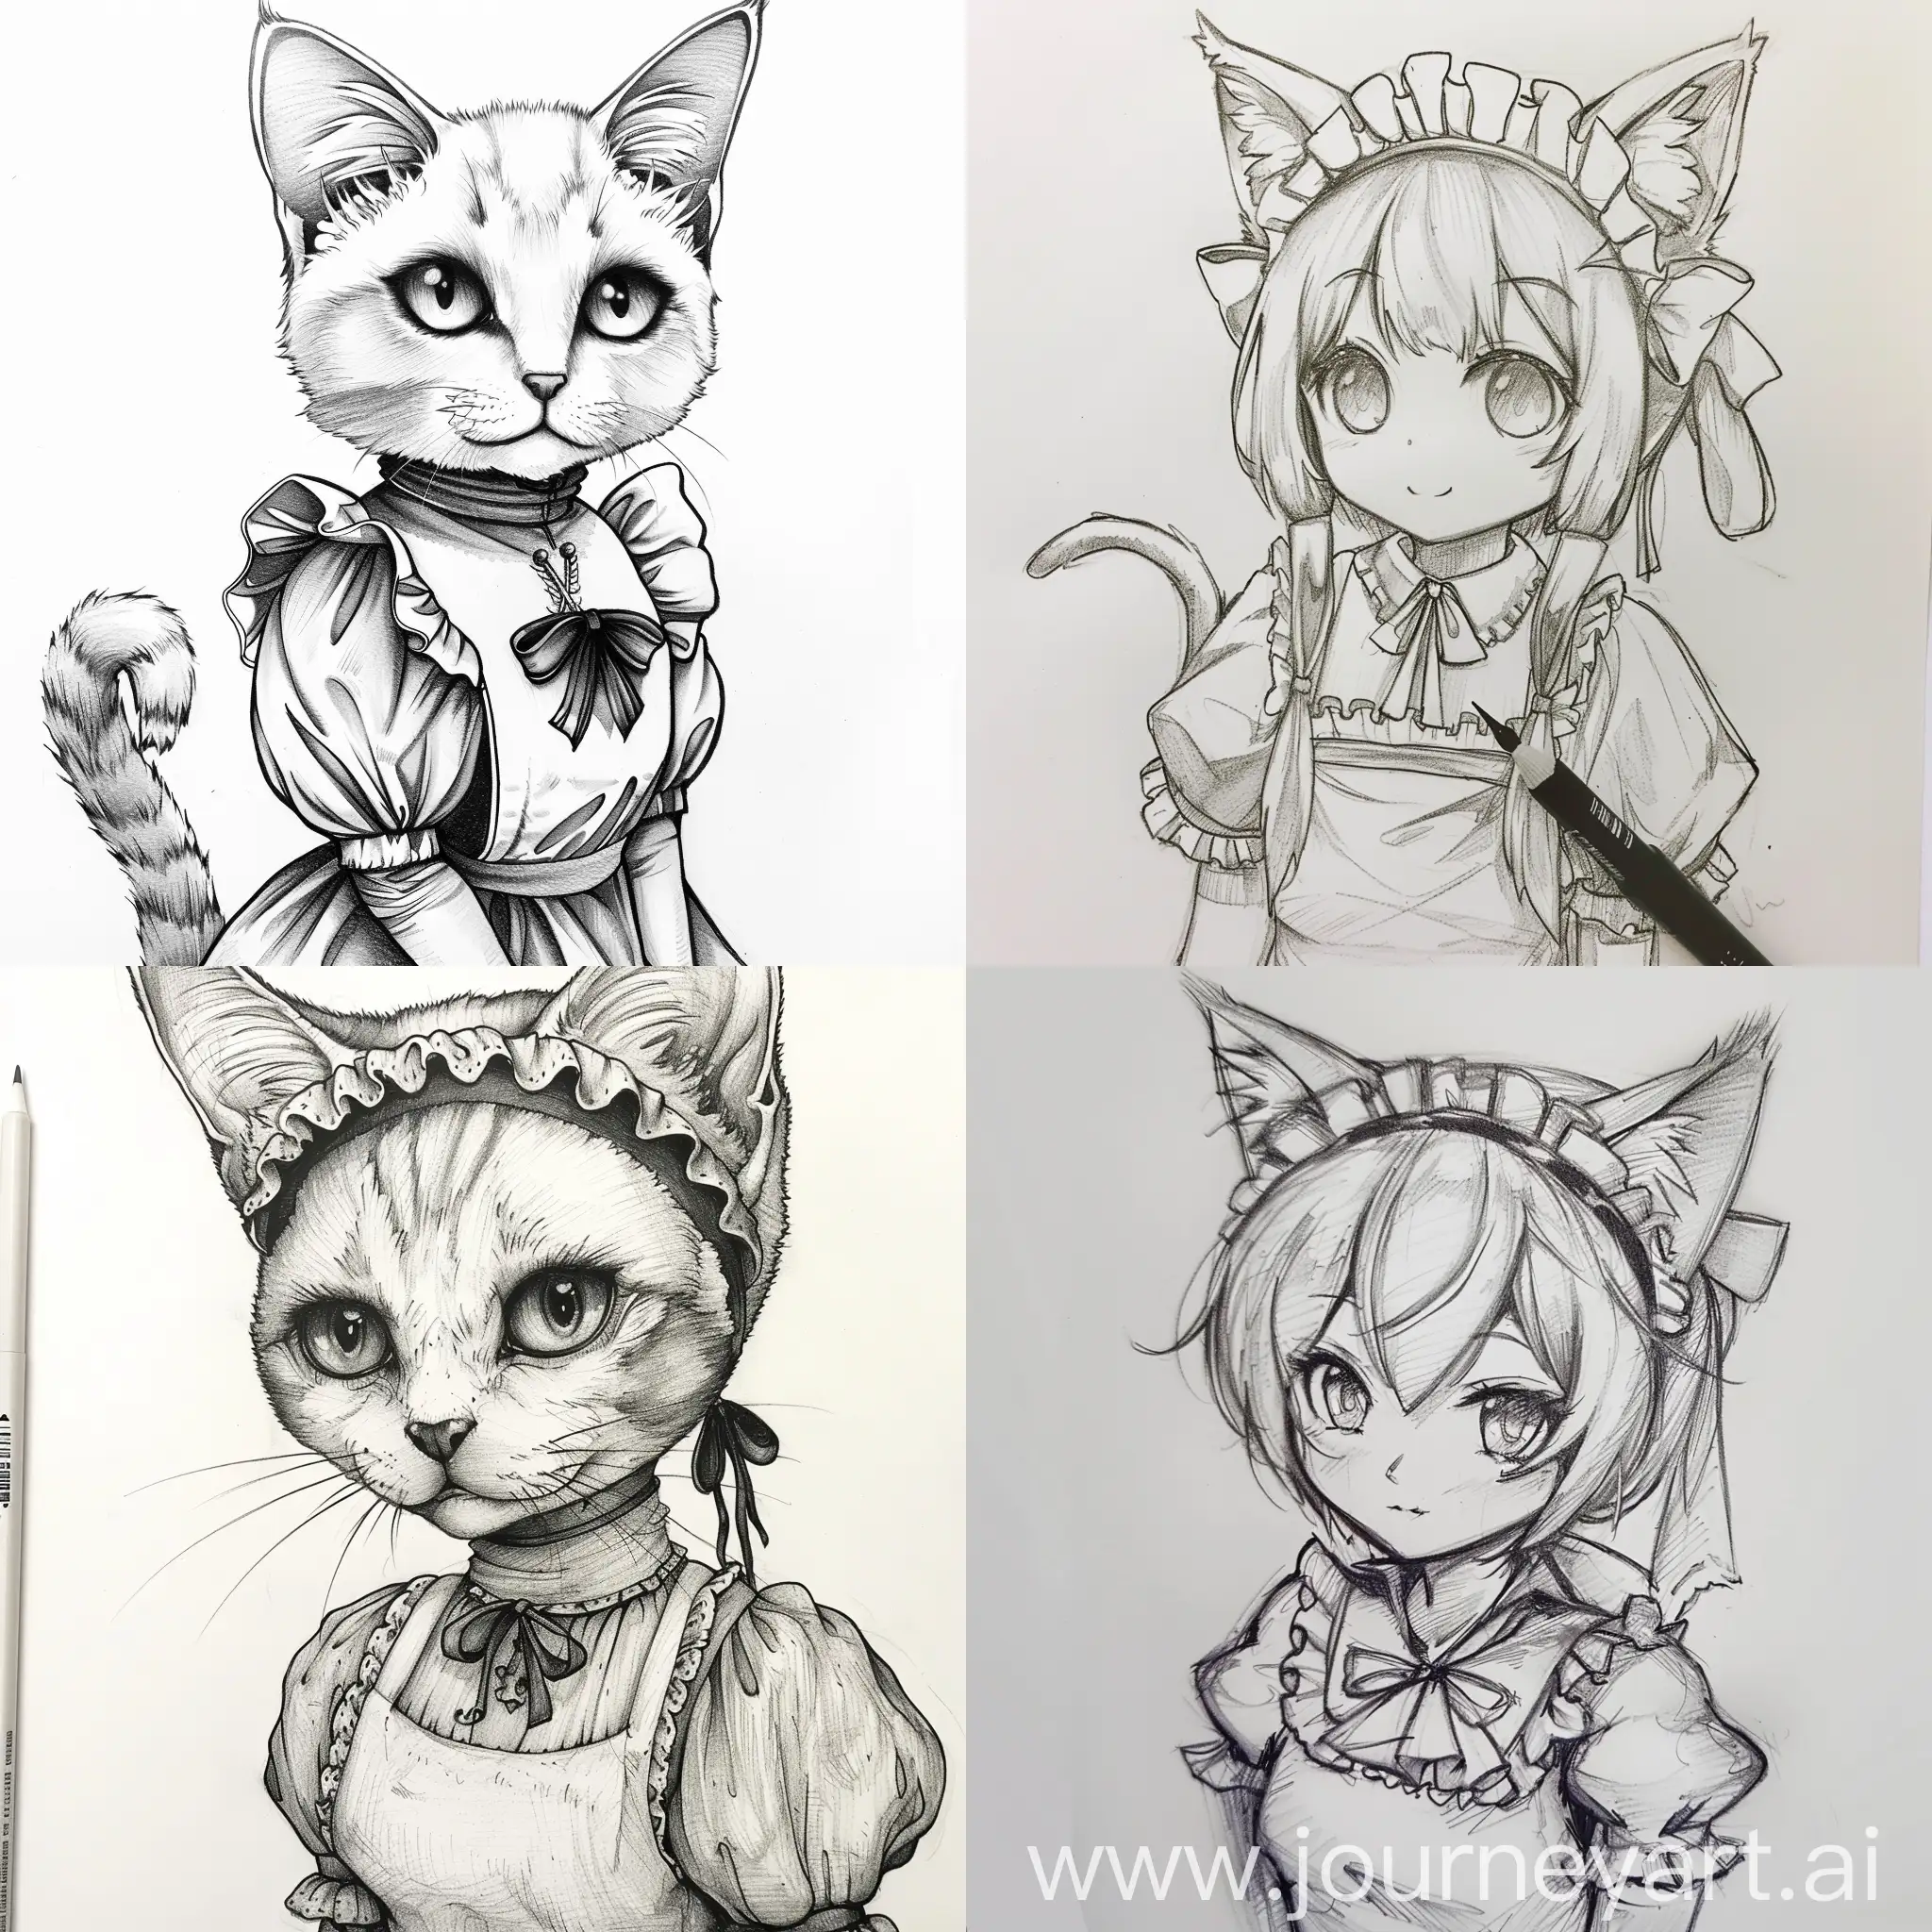 Cute-Maid-Cat-Illustration-with-Whimsical-Charm